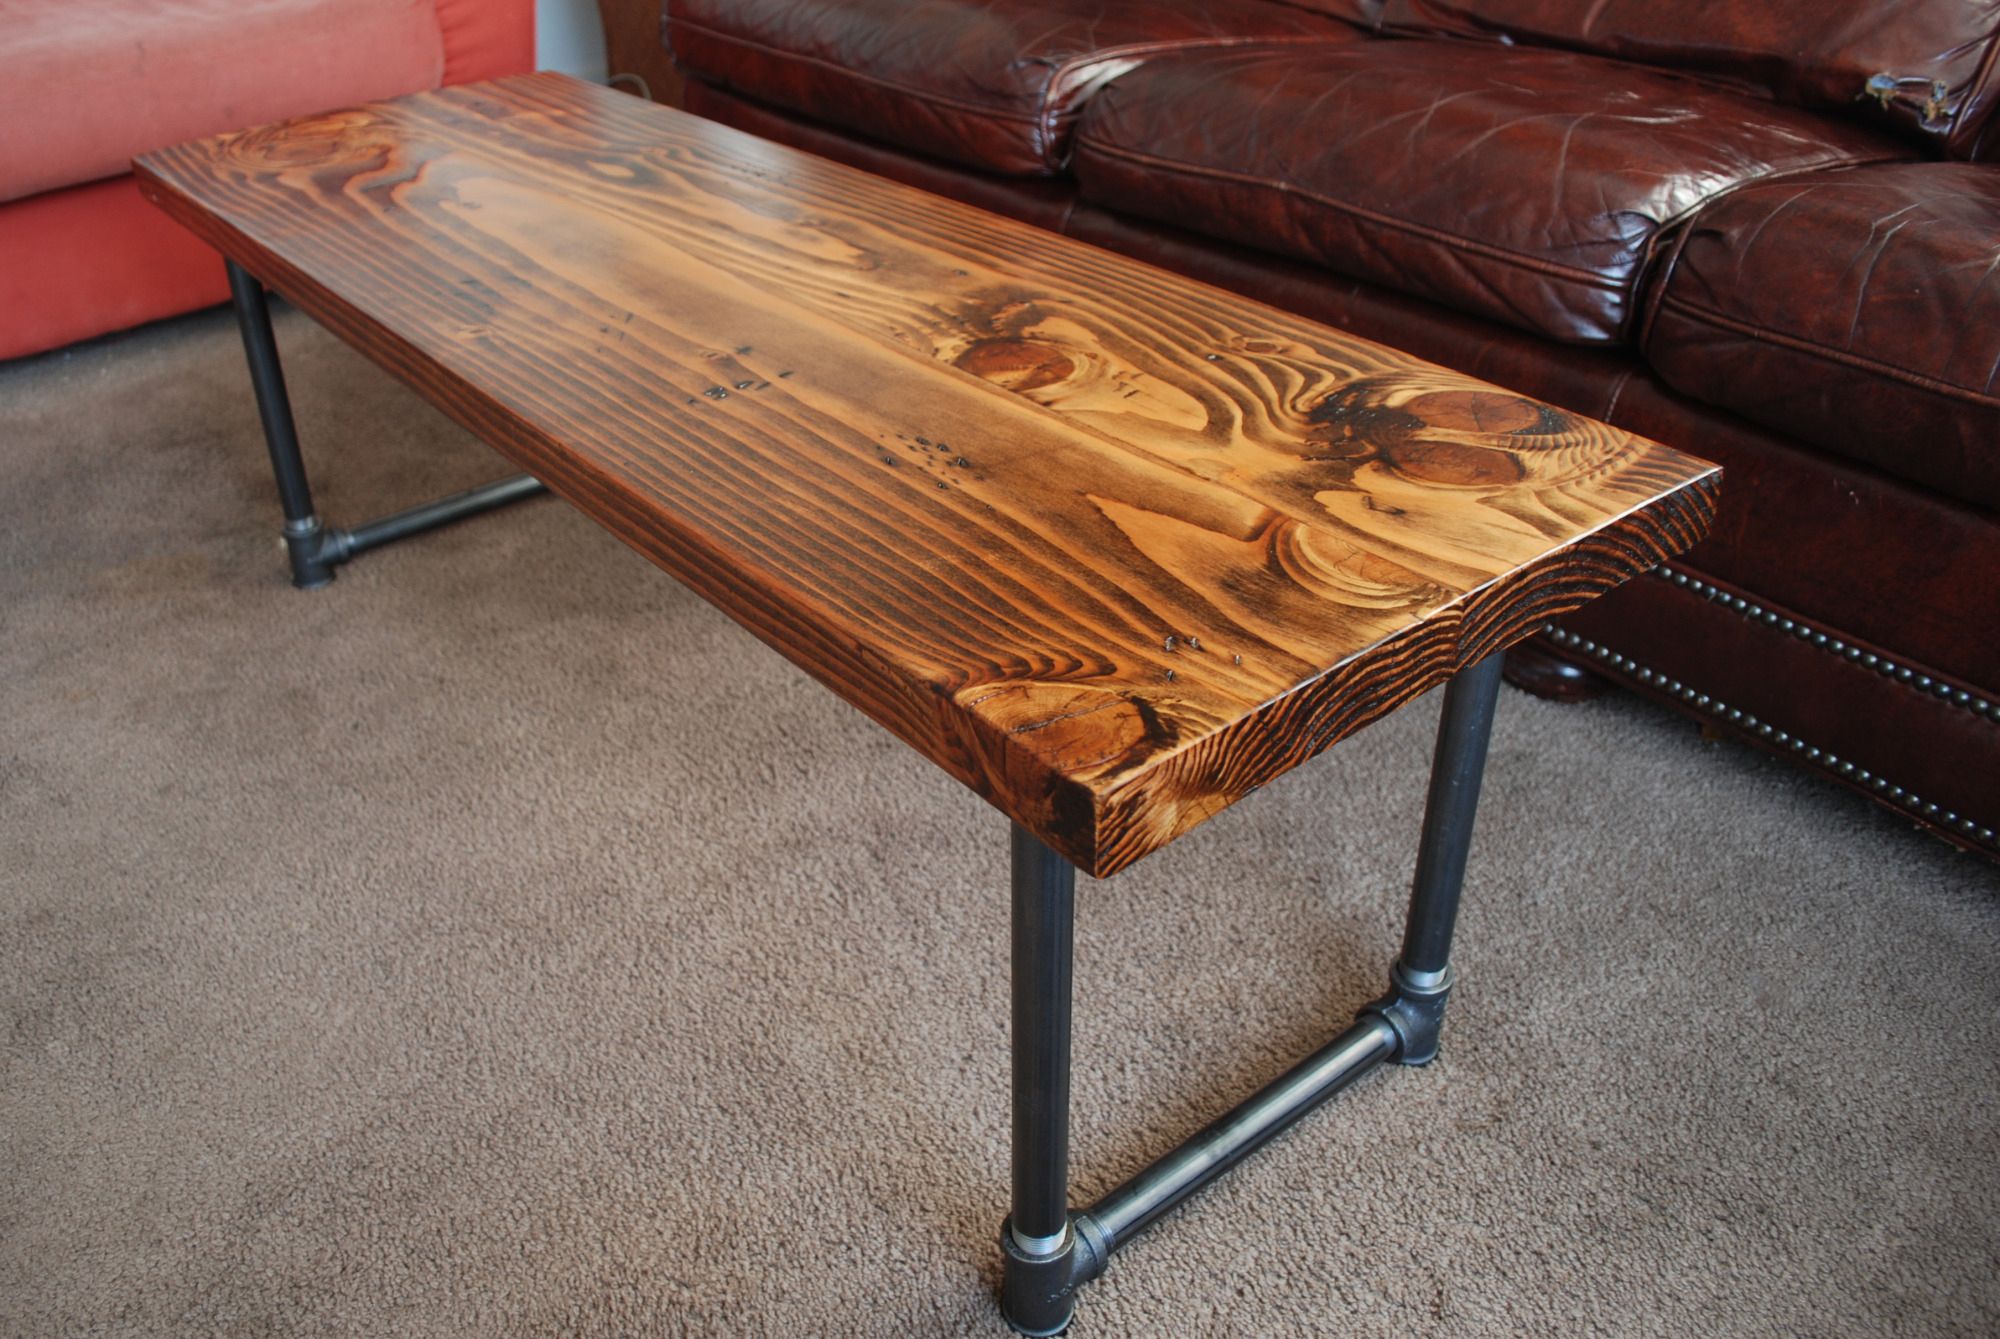 8 Rustic Wood And Wrought Iron Coffee Table Photos With Oak Wood And Metal Legs Coffee Tables (View 6 of 15)